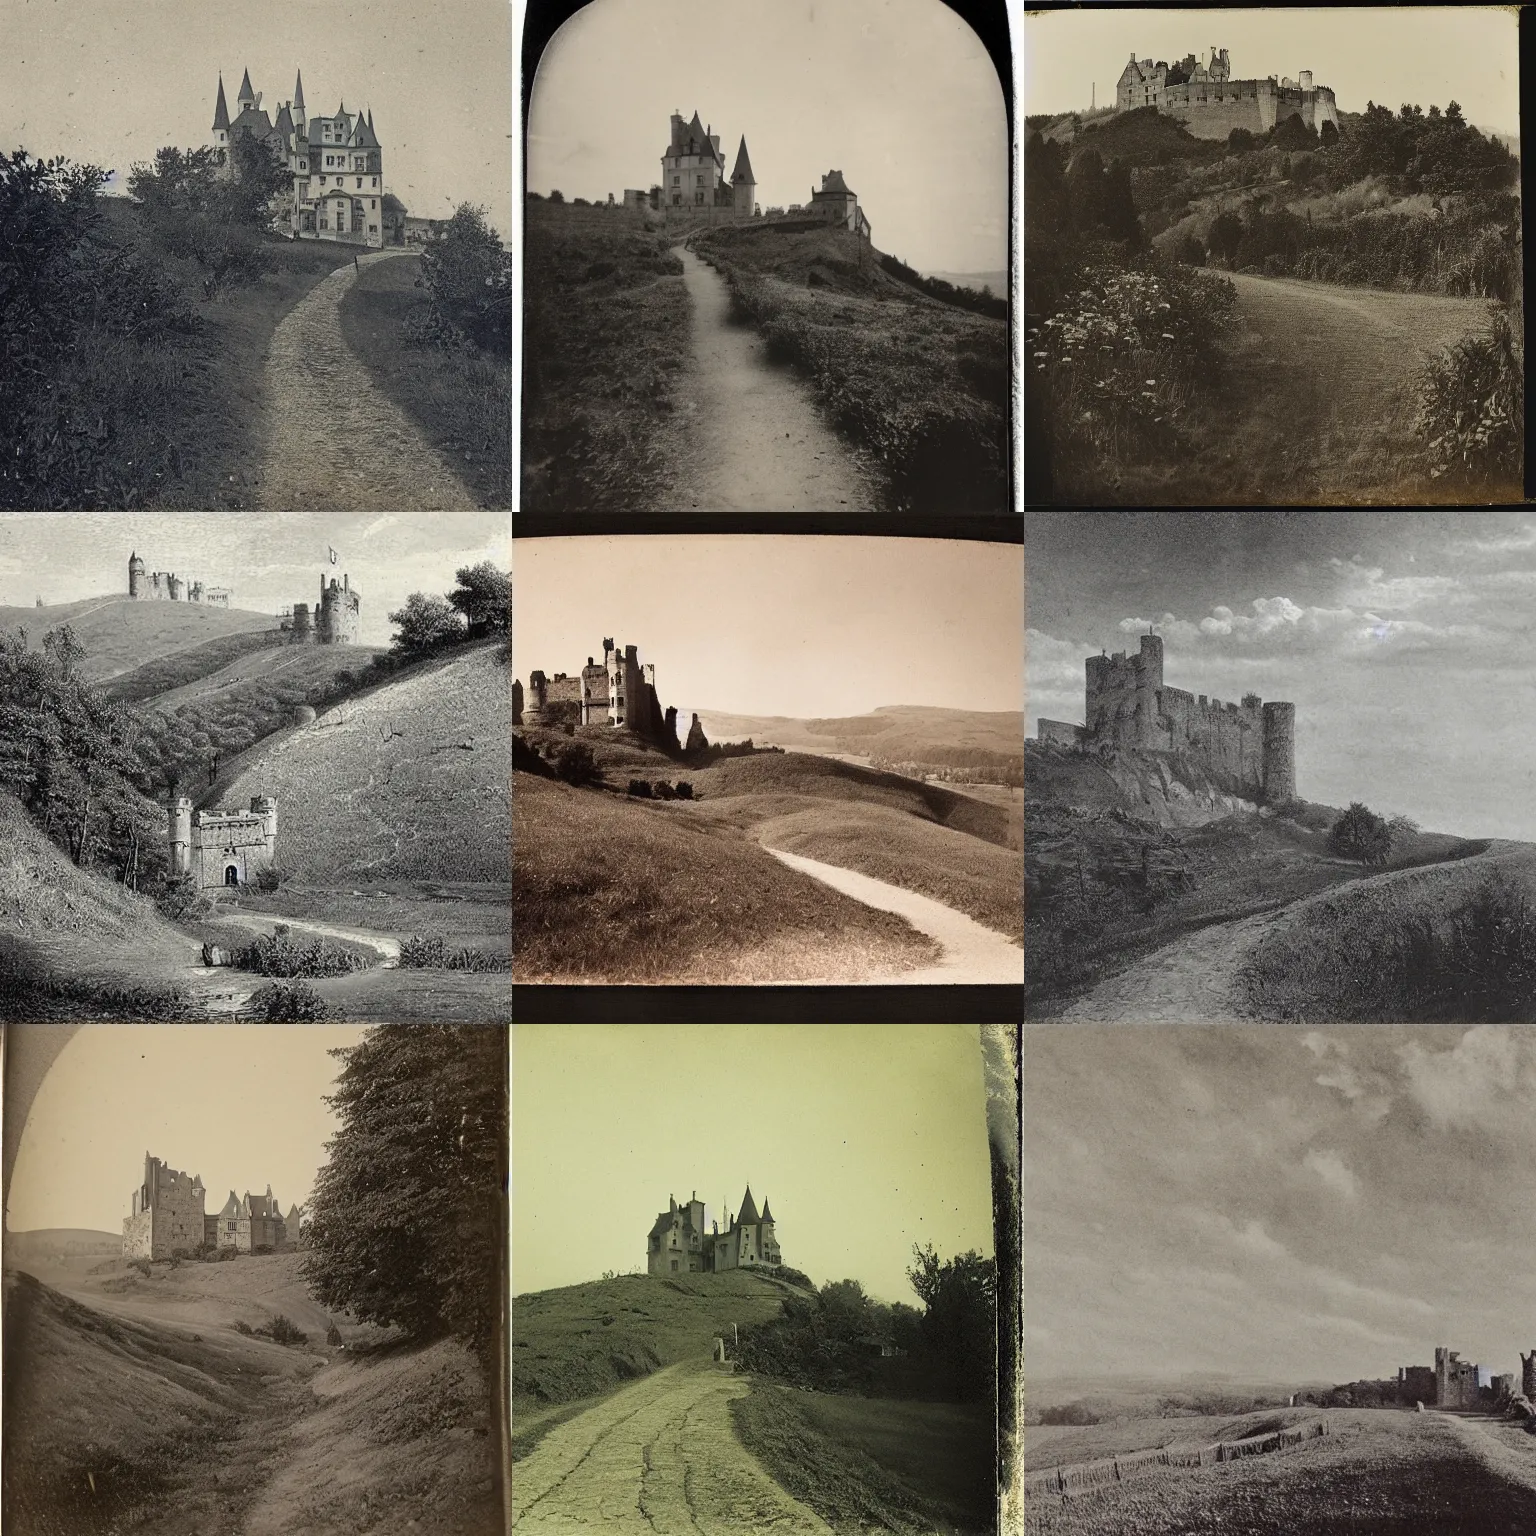 Prompt: 1 8 8 0 s photograph, a hilly landscape with castle and path